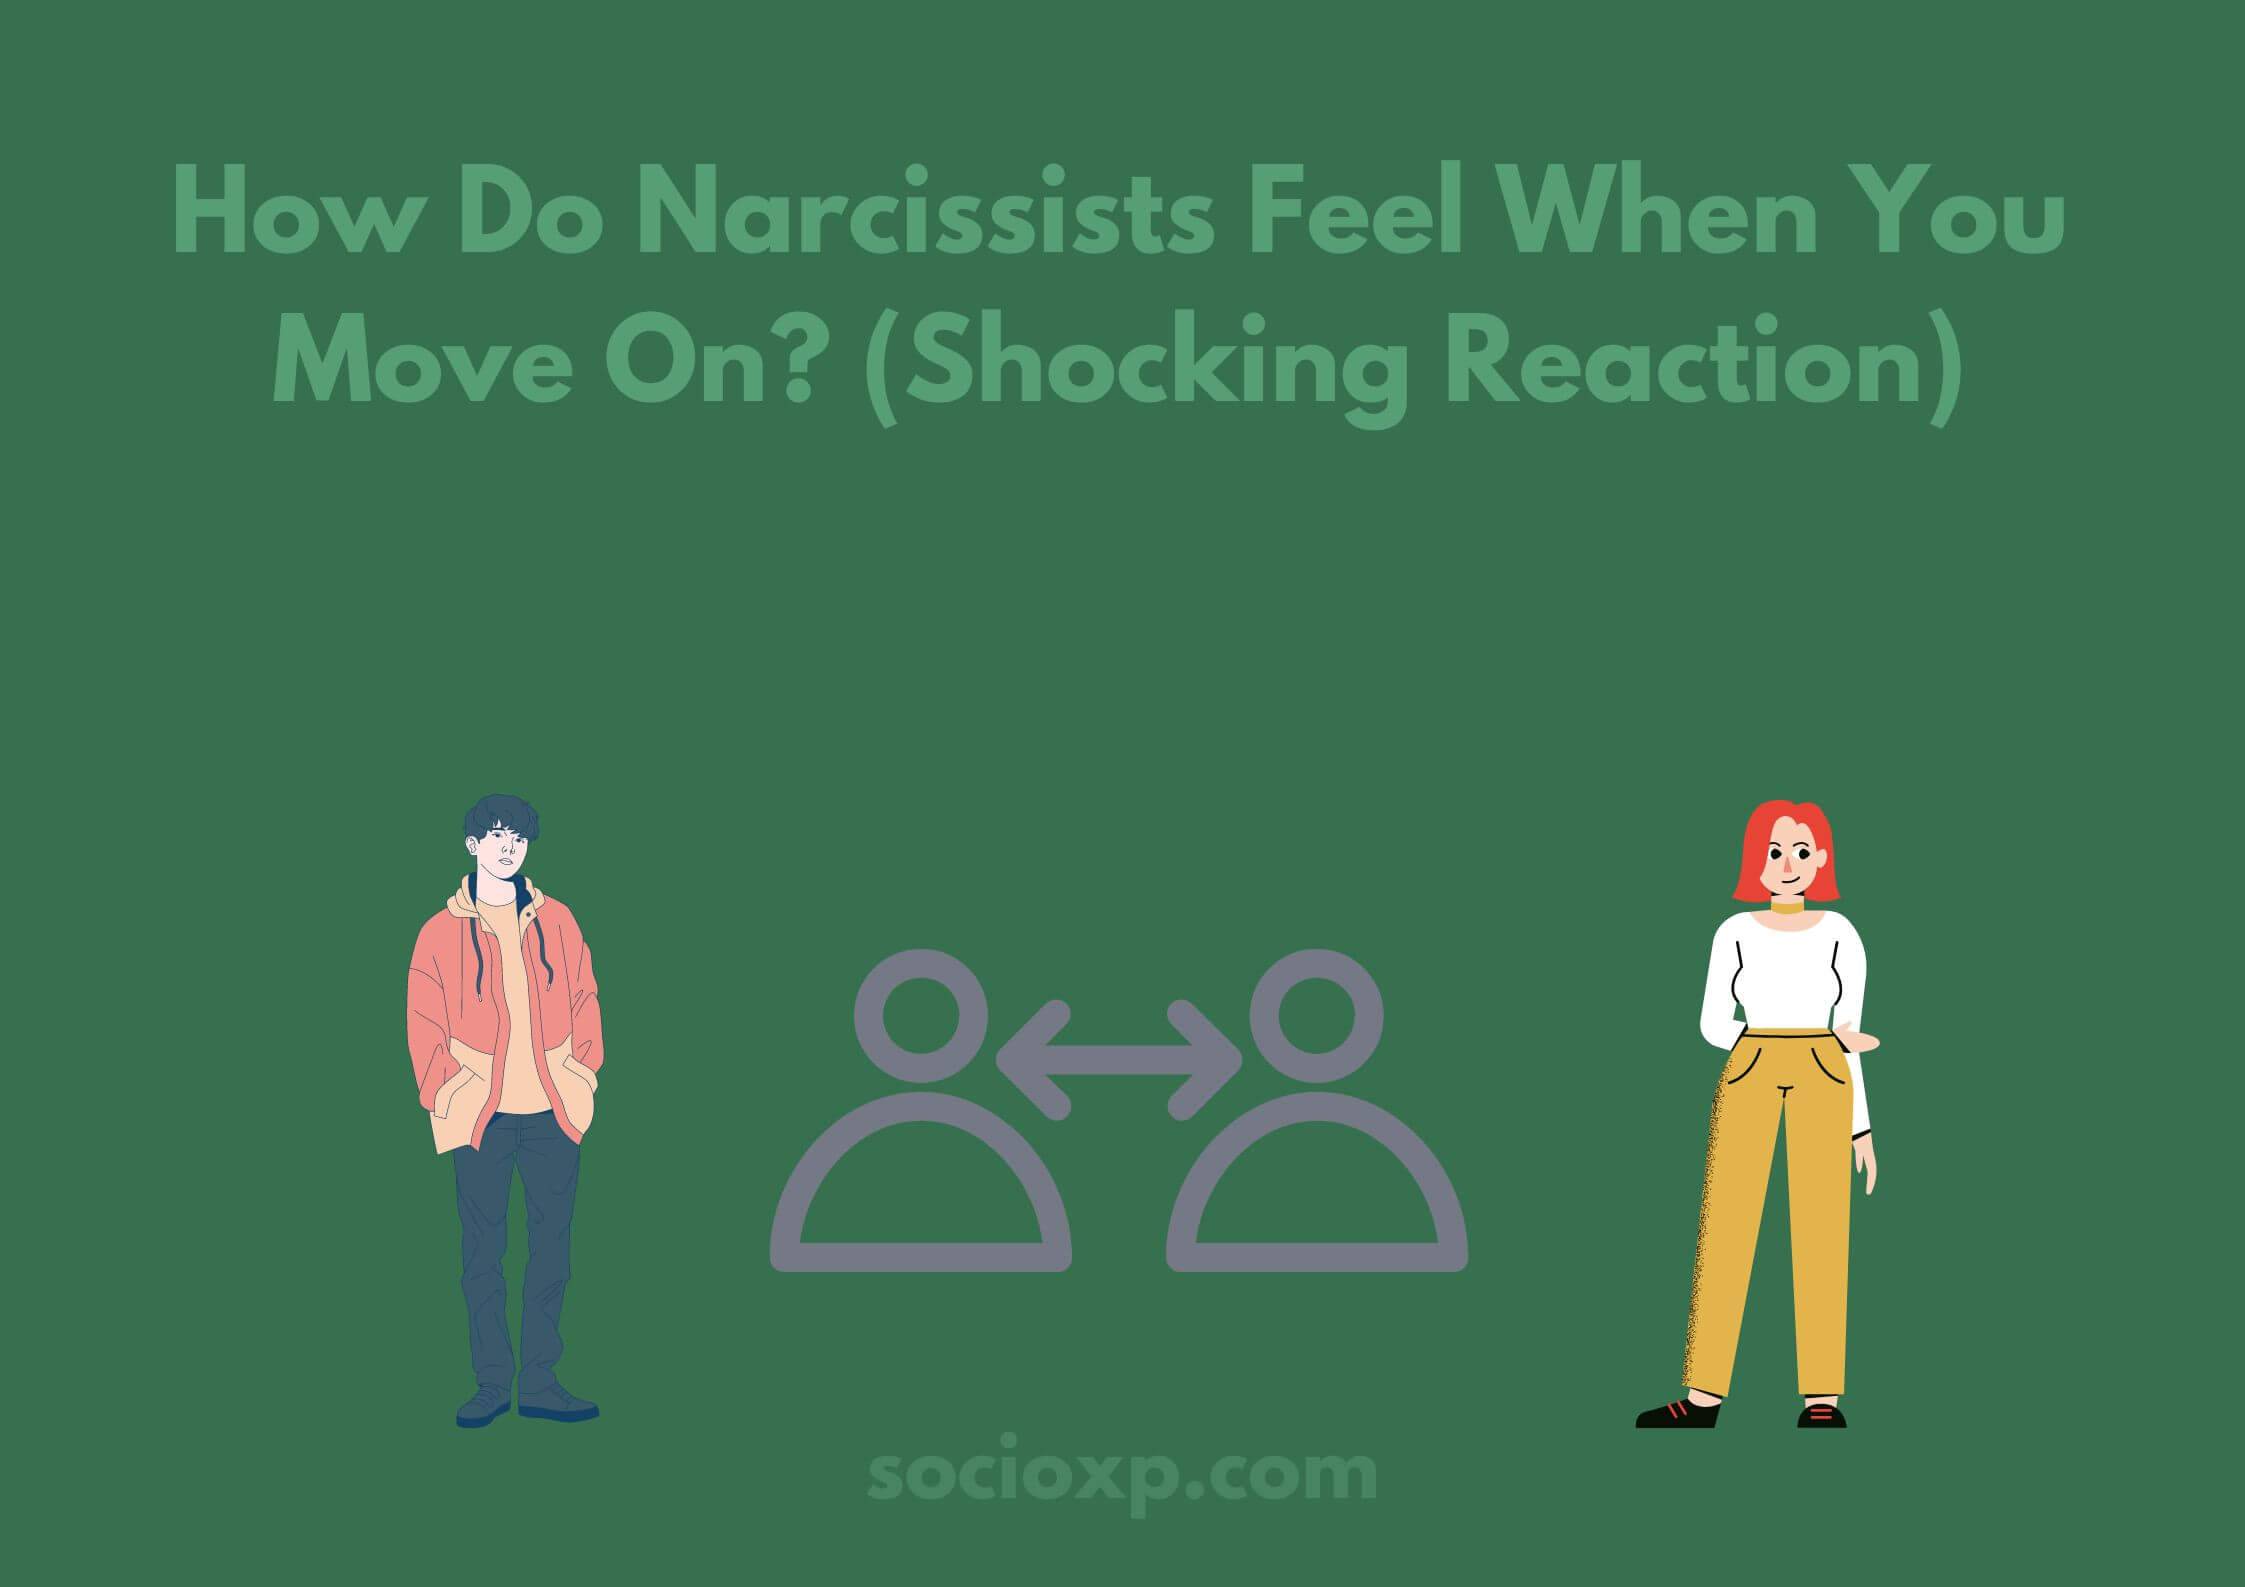 How Do Narcissists Feel When You Move On? (Shocking Reaction)